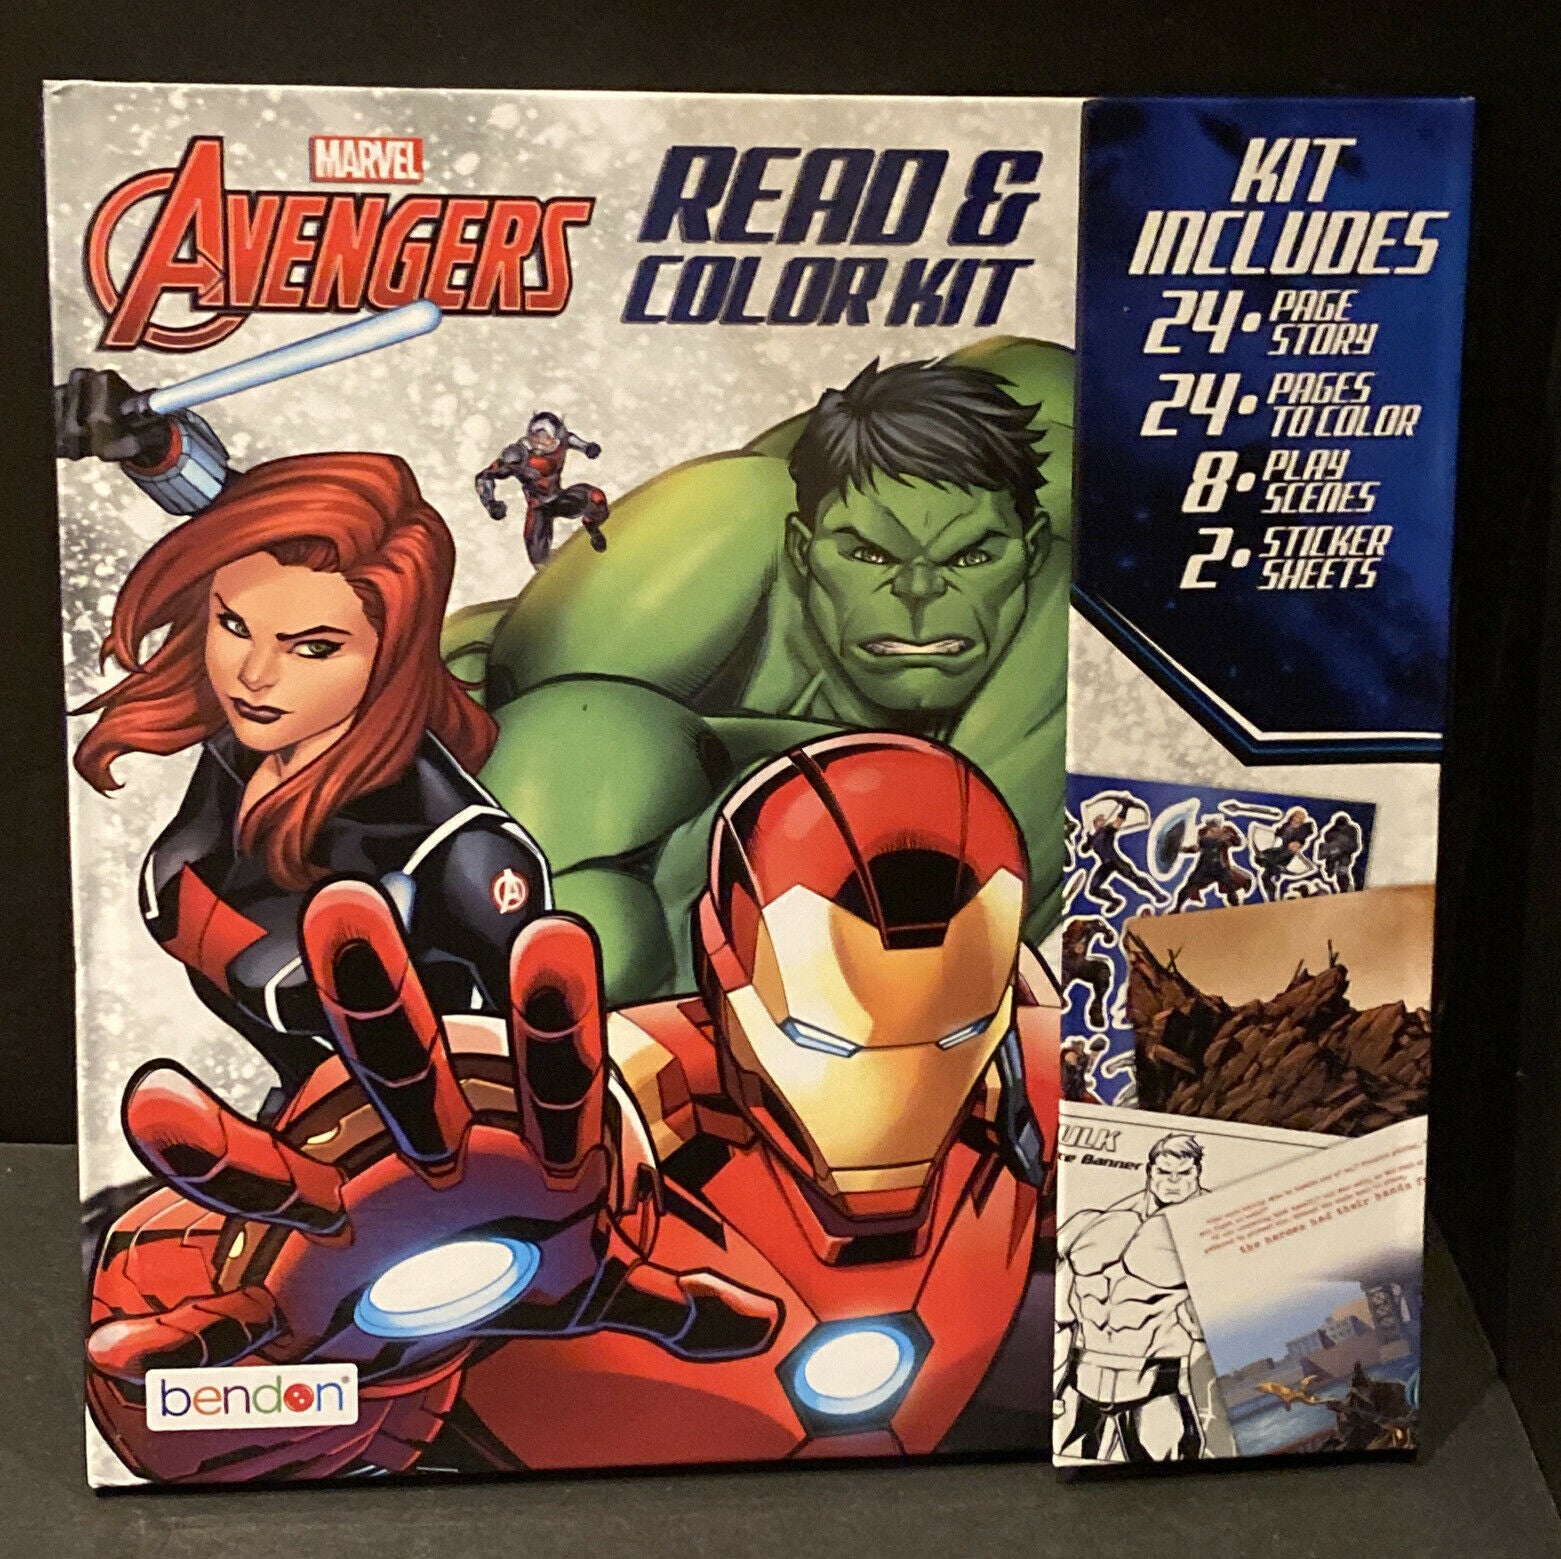 New MARVEL AVENGERS READ AND COLOR KIT by bendon – The Odd Assortment